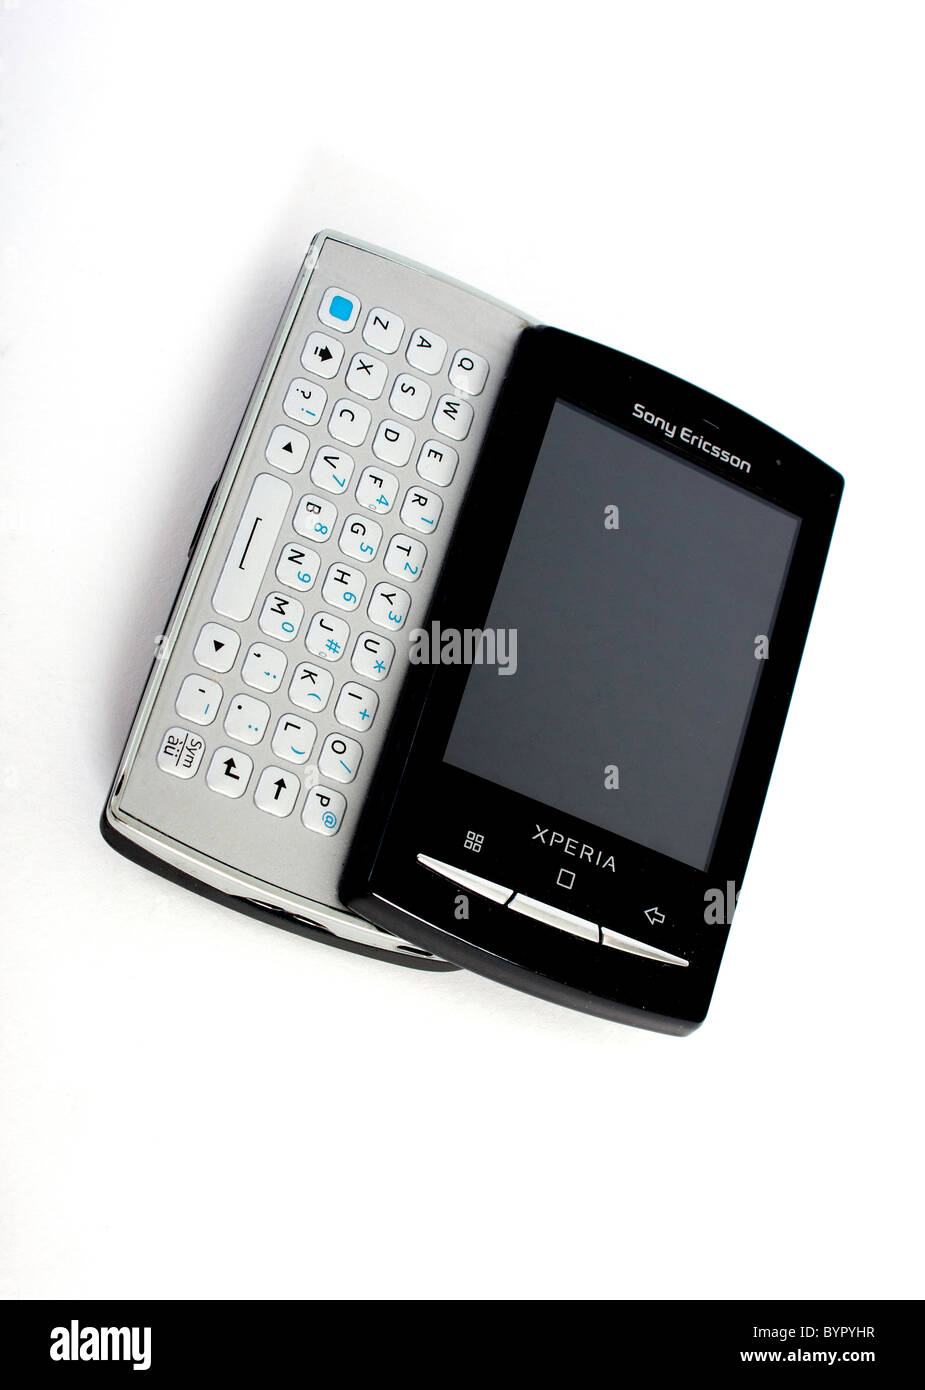 The new Sony Ericsson Xperia mini pro mobile phone with full slide out qwerty keyboard; displaying a blank screen. Stock Photo